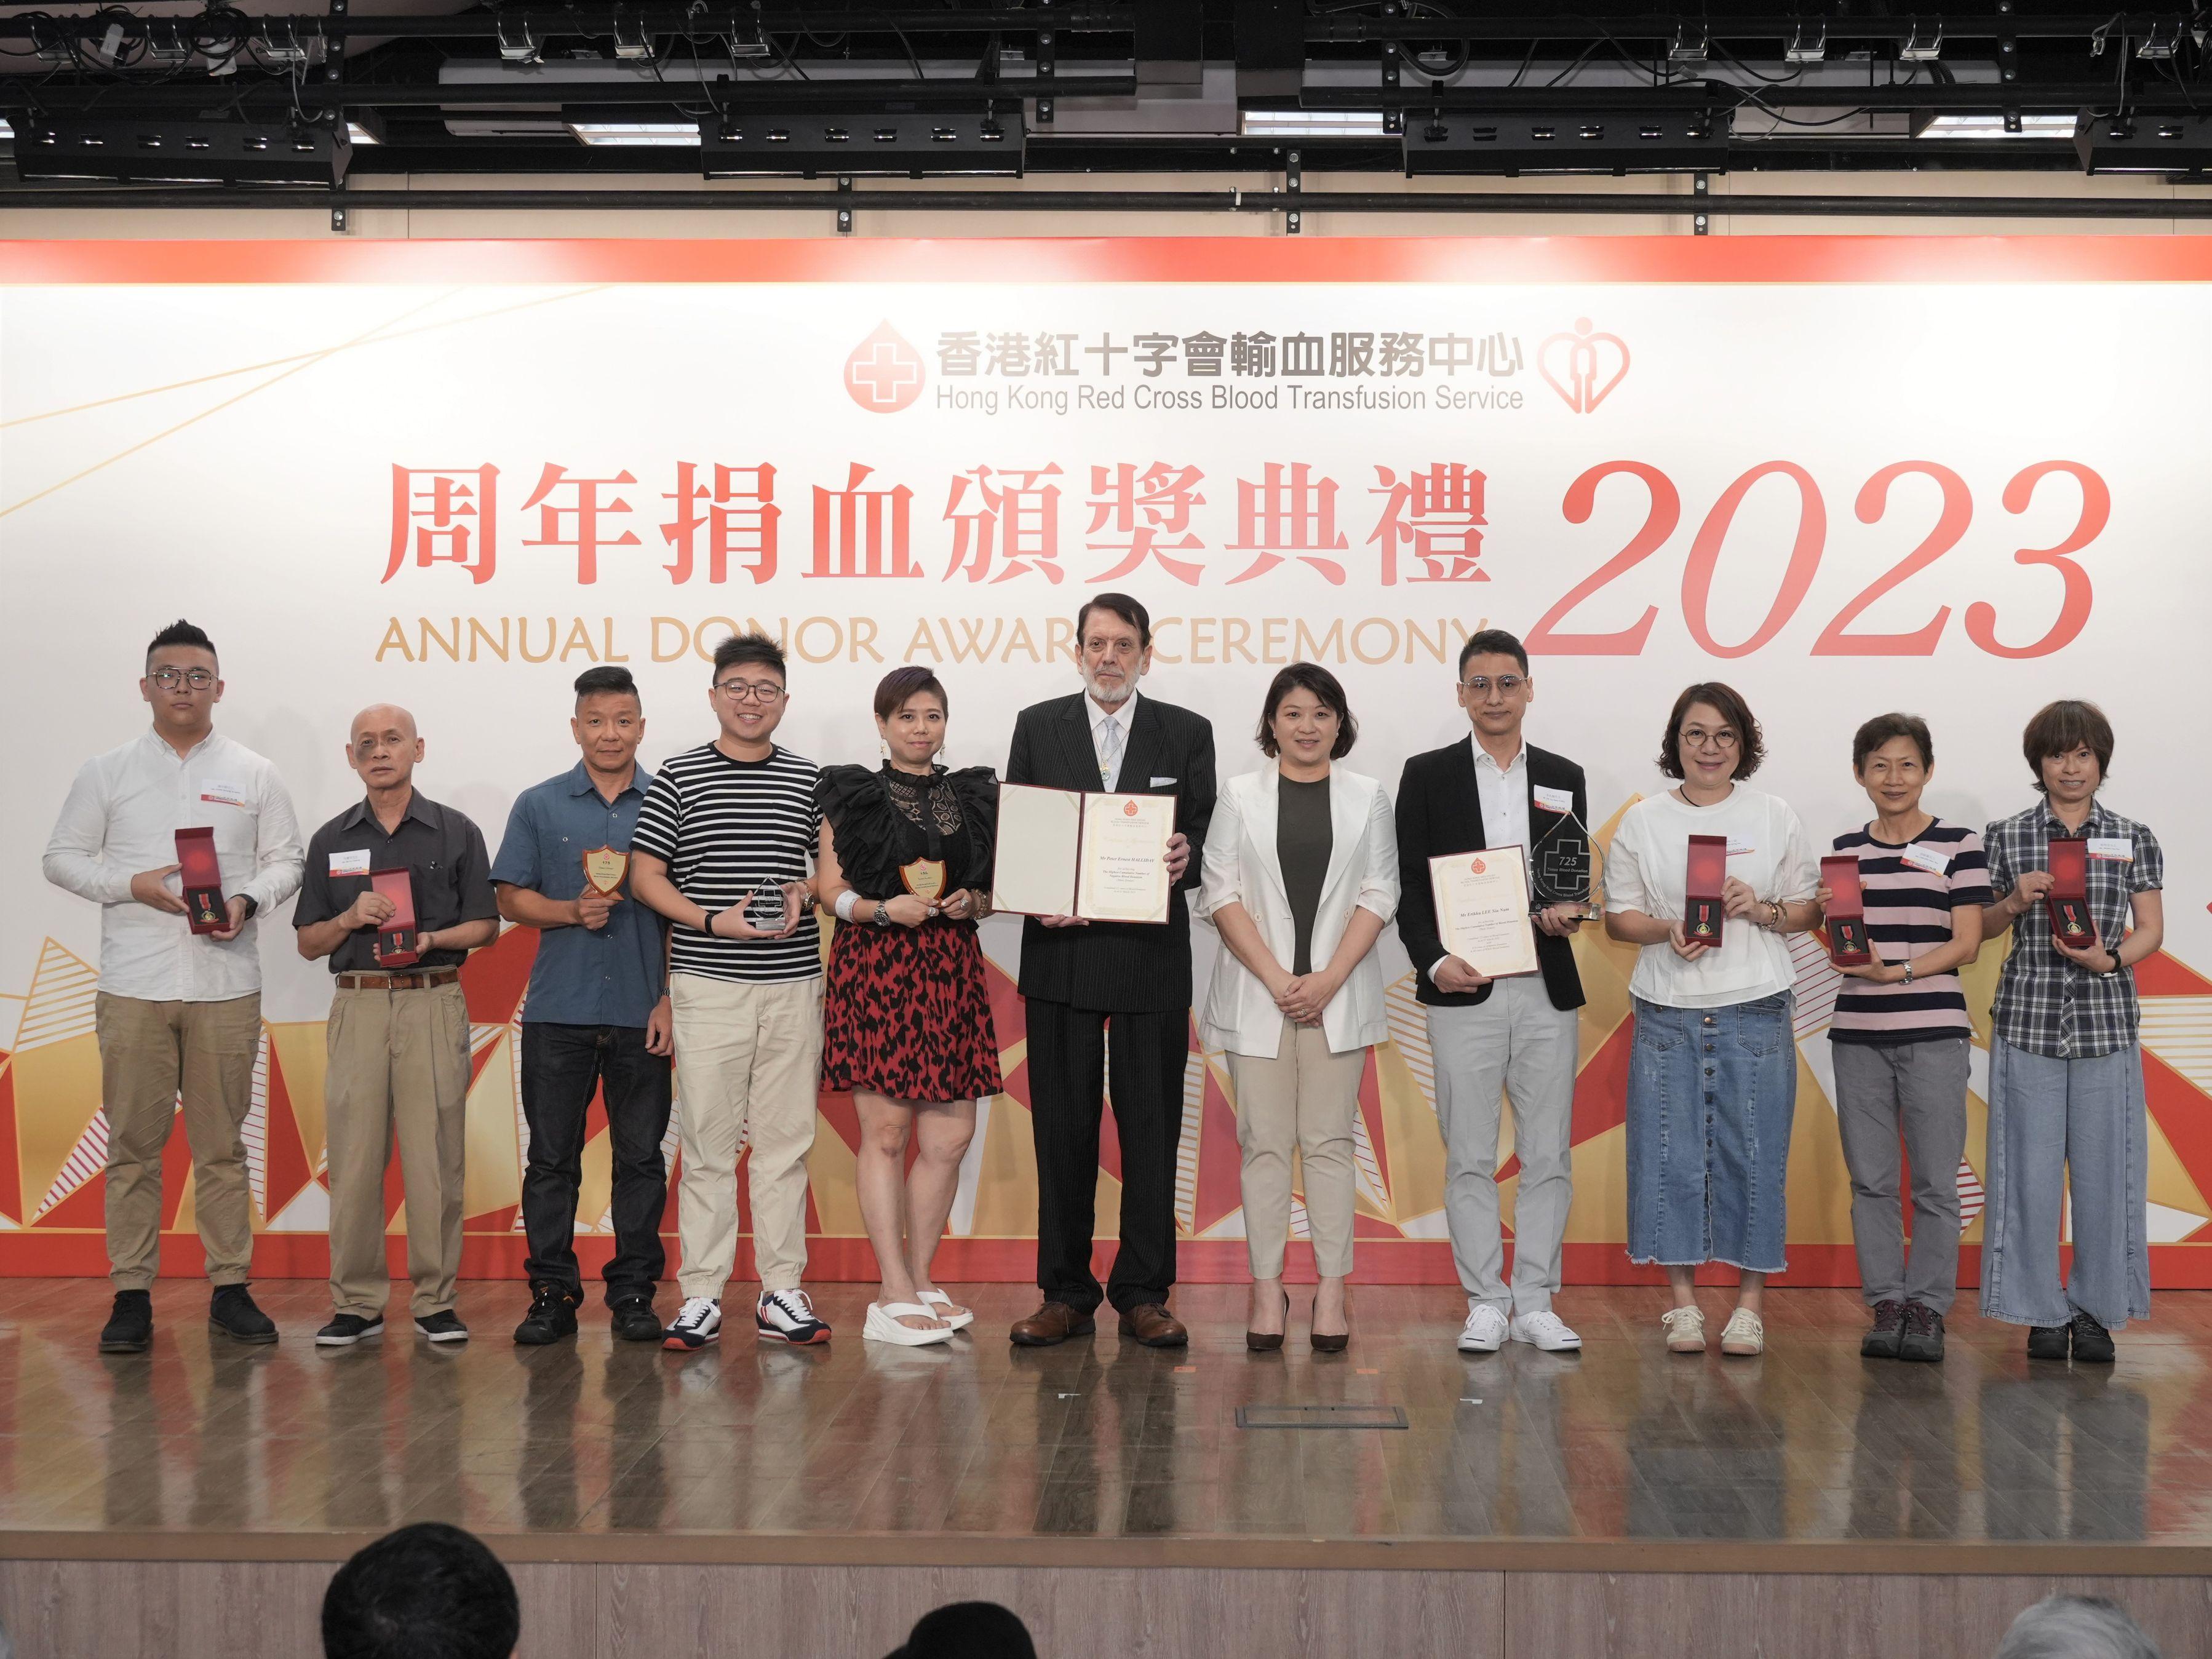 The Hong Kong Red Cross Blood Transfusion Service today (June 10) held its Annual Donor Award Ceremony to commend outstanding blood donors. Photo shows the Acting Secretary for Health, Dr Libby Lee (fifth right), presenting awards to outstanding blood donors.